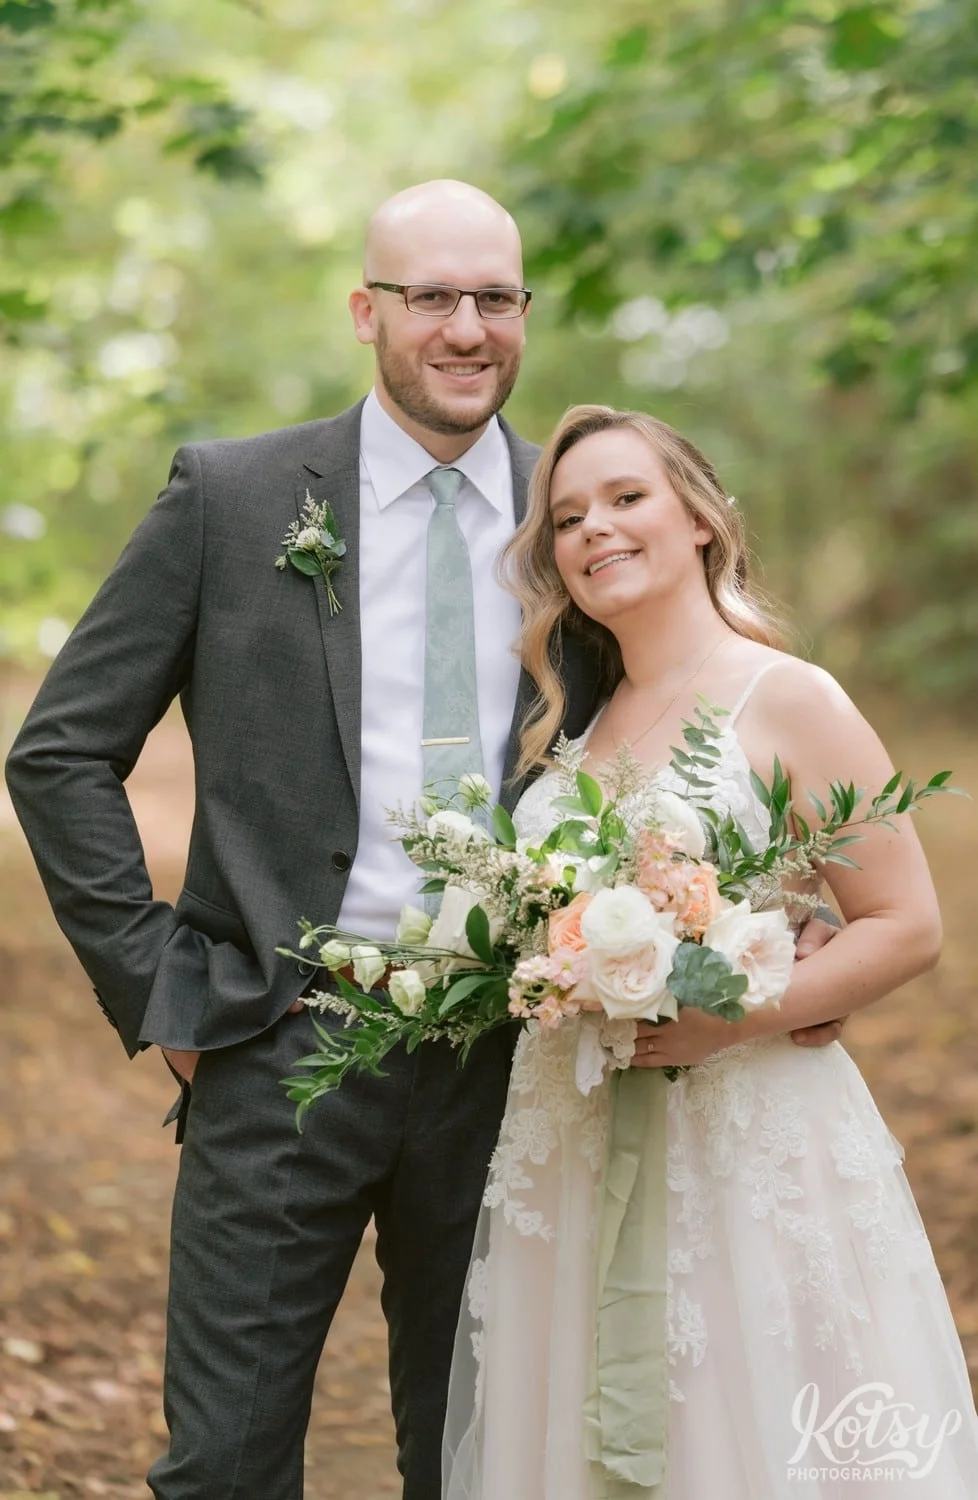 A grim wearing a gray suit and green tie and a bride wearing a white bridal gown and holding a flower bouquet pose for a photo at West Deane Park in Toronto, Canada